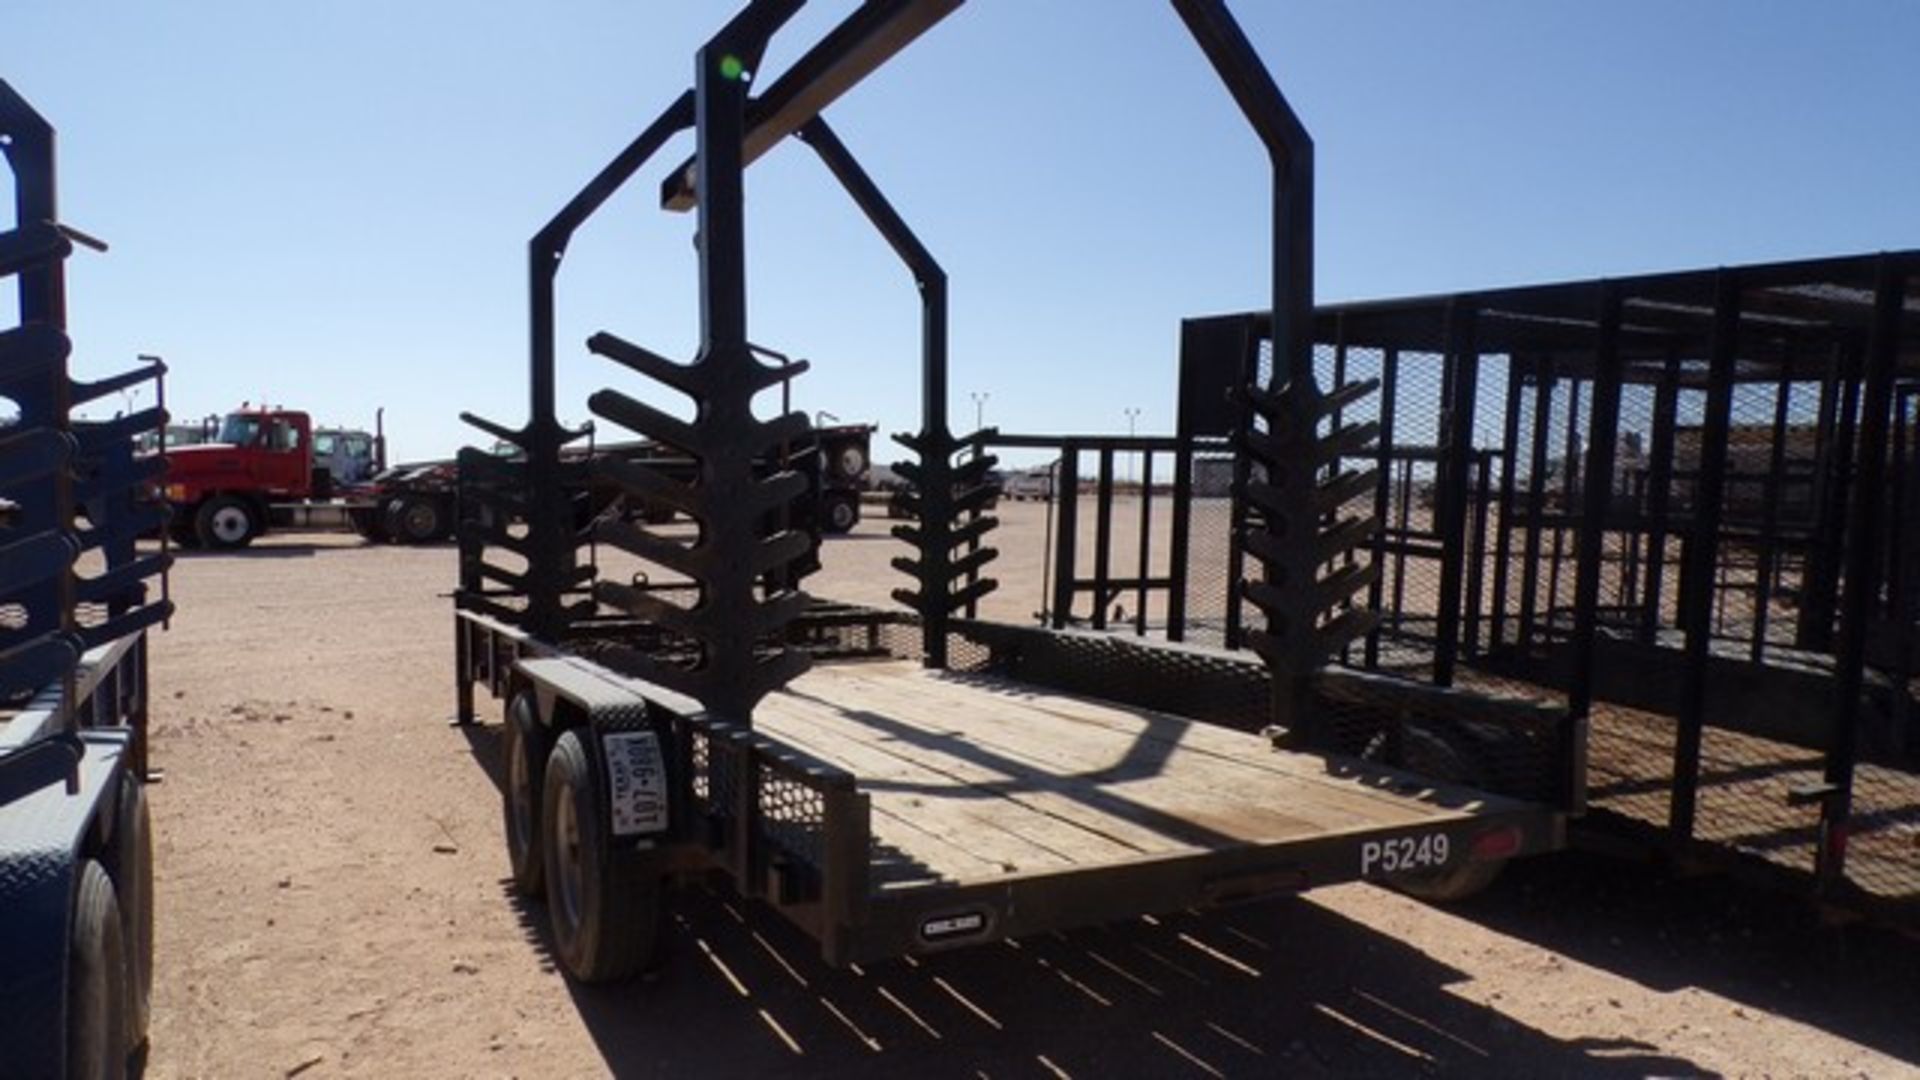 Located in YARD 1 - Midland, TX (P5249) (2357) (X) 2019 PULL DO T/A COMBO MONORAIL/ TOOL TRAILER, - Bild 3 aus 4